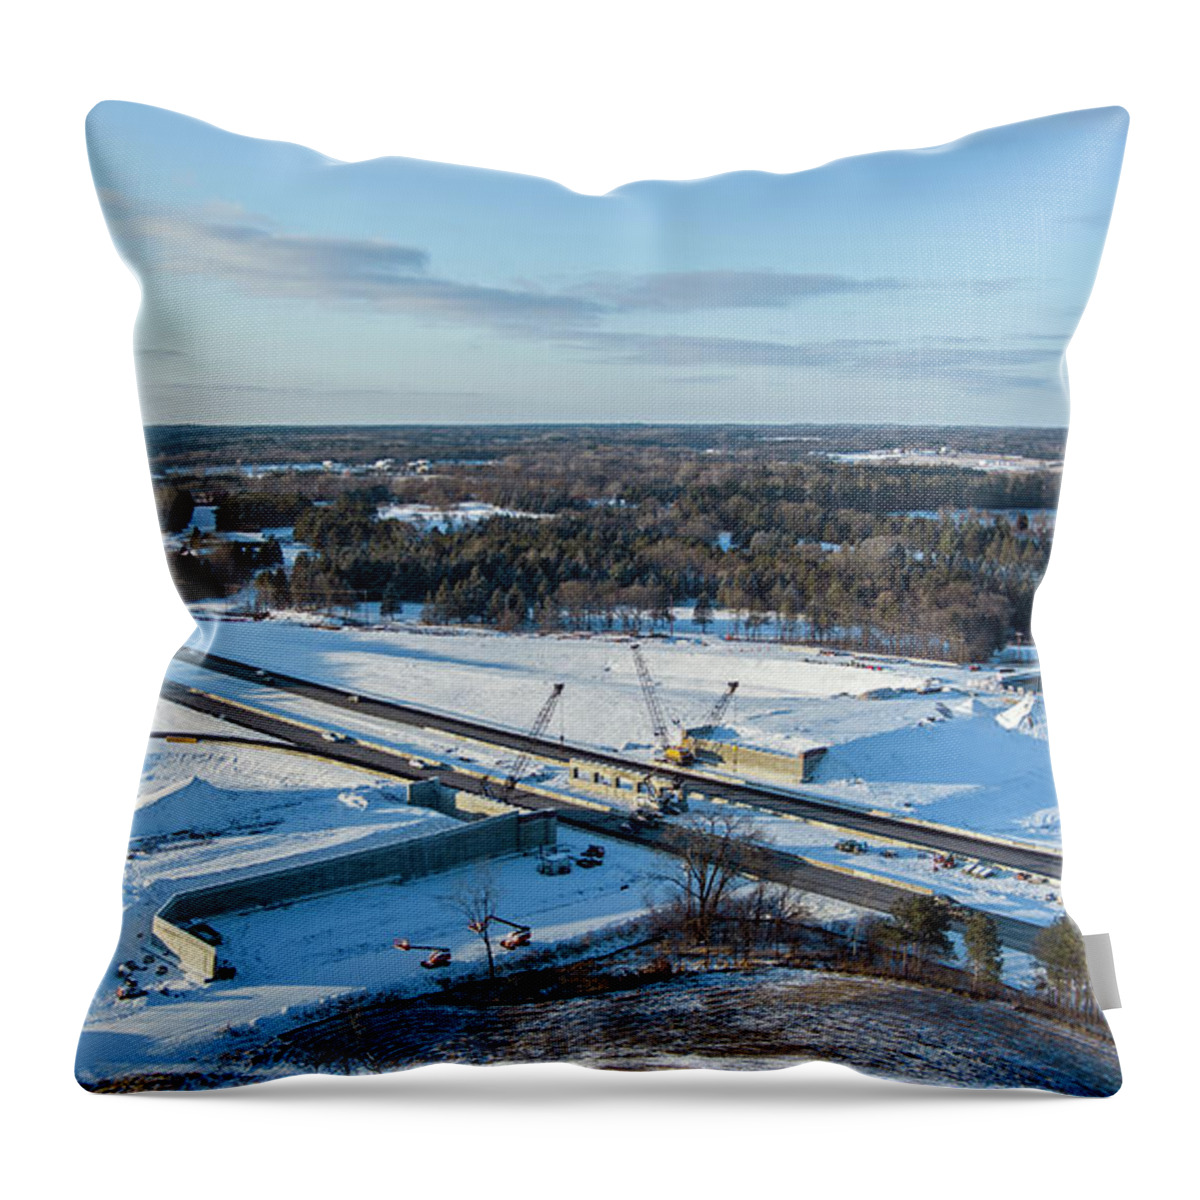 Drone Throw Pillow featuring the photograph Pictures Over Stillwater Highway 36 Manning Interchange Progress by Greg Schulz Pictures Over Stillwater